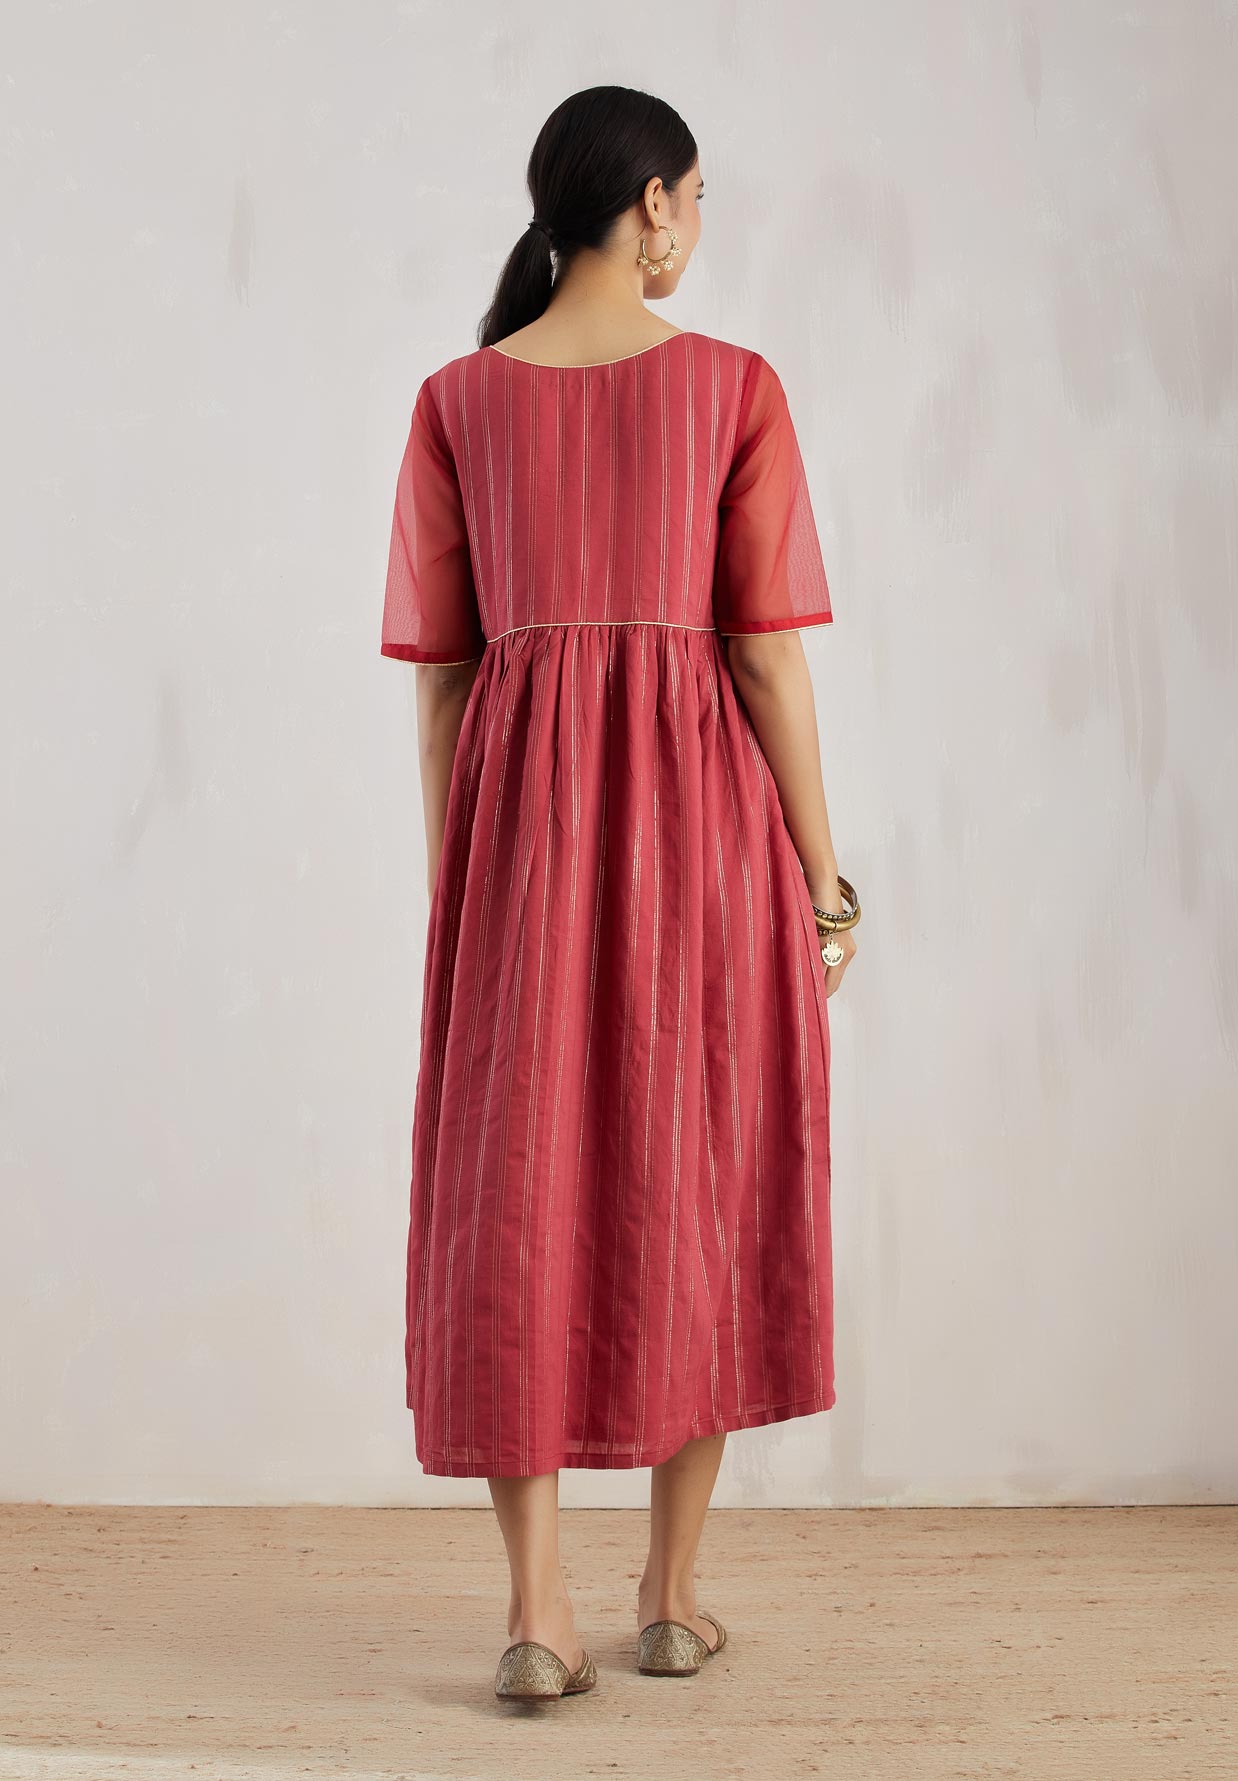 Red Meissa Dress - The Indian Cause